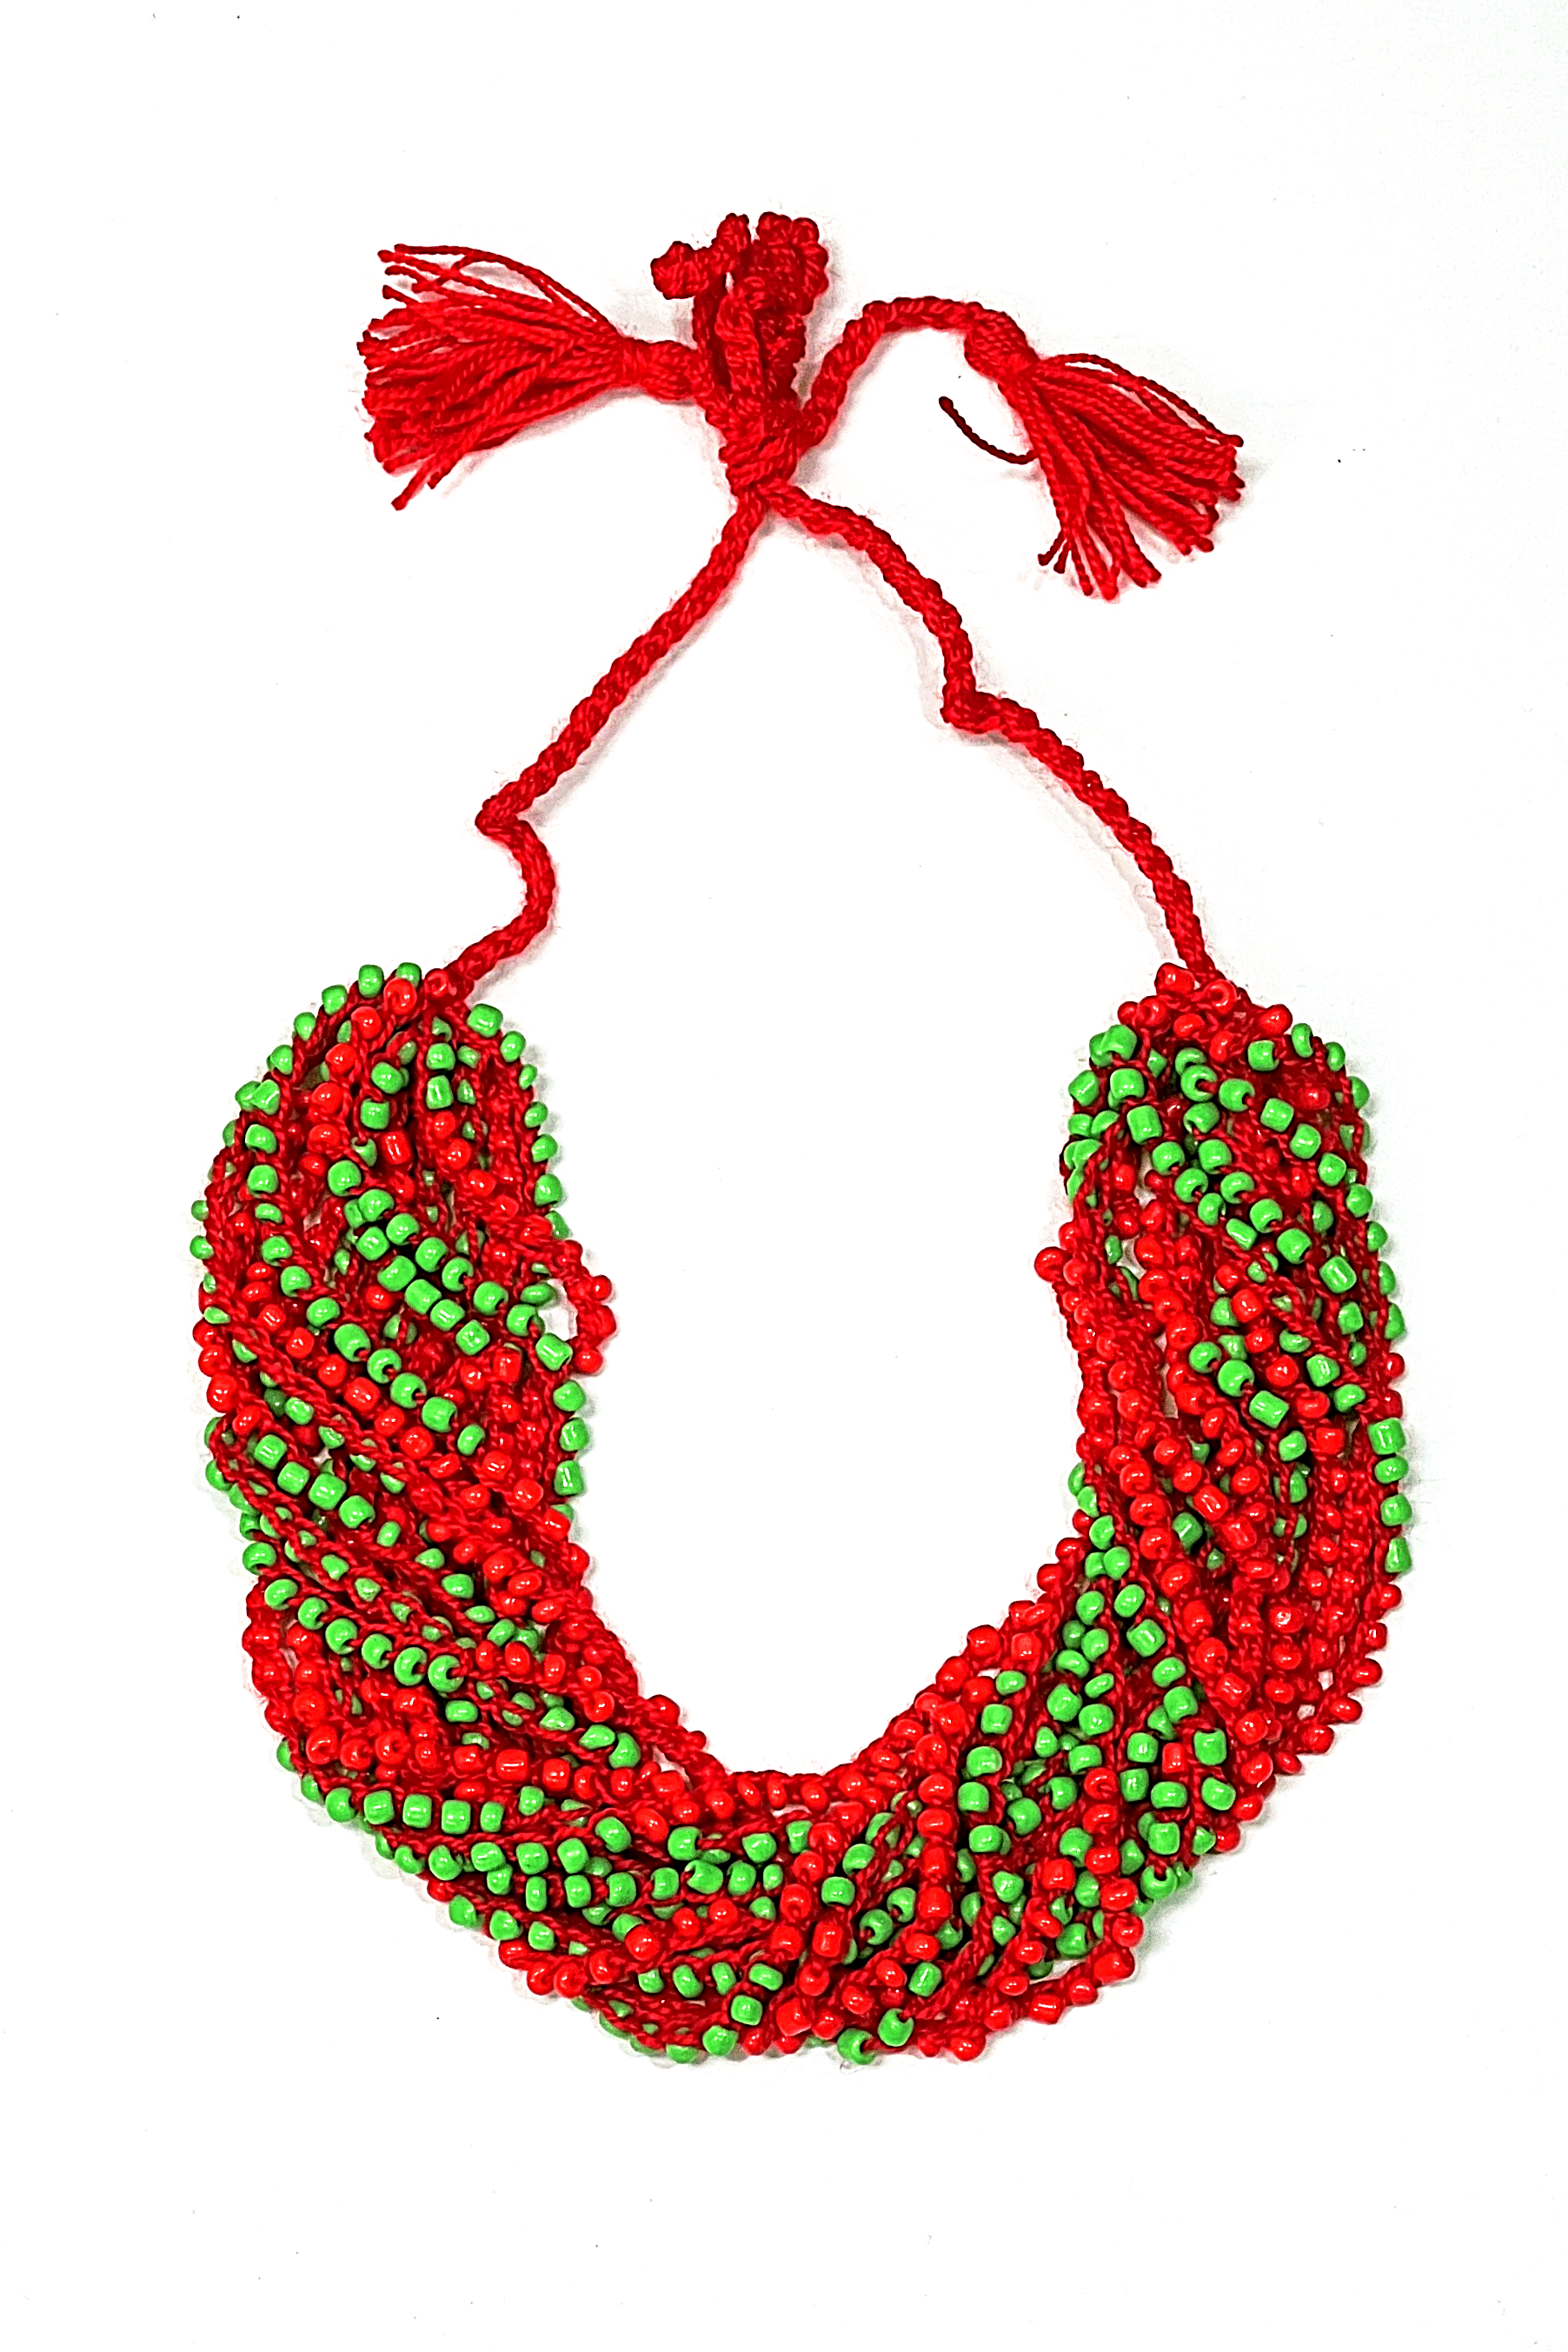 Artisan crafted woven bead necklace. Red and green